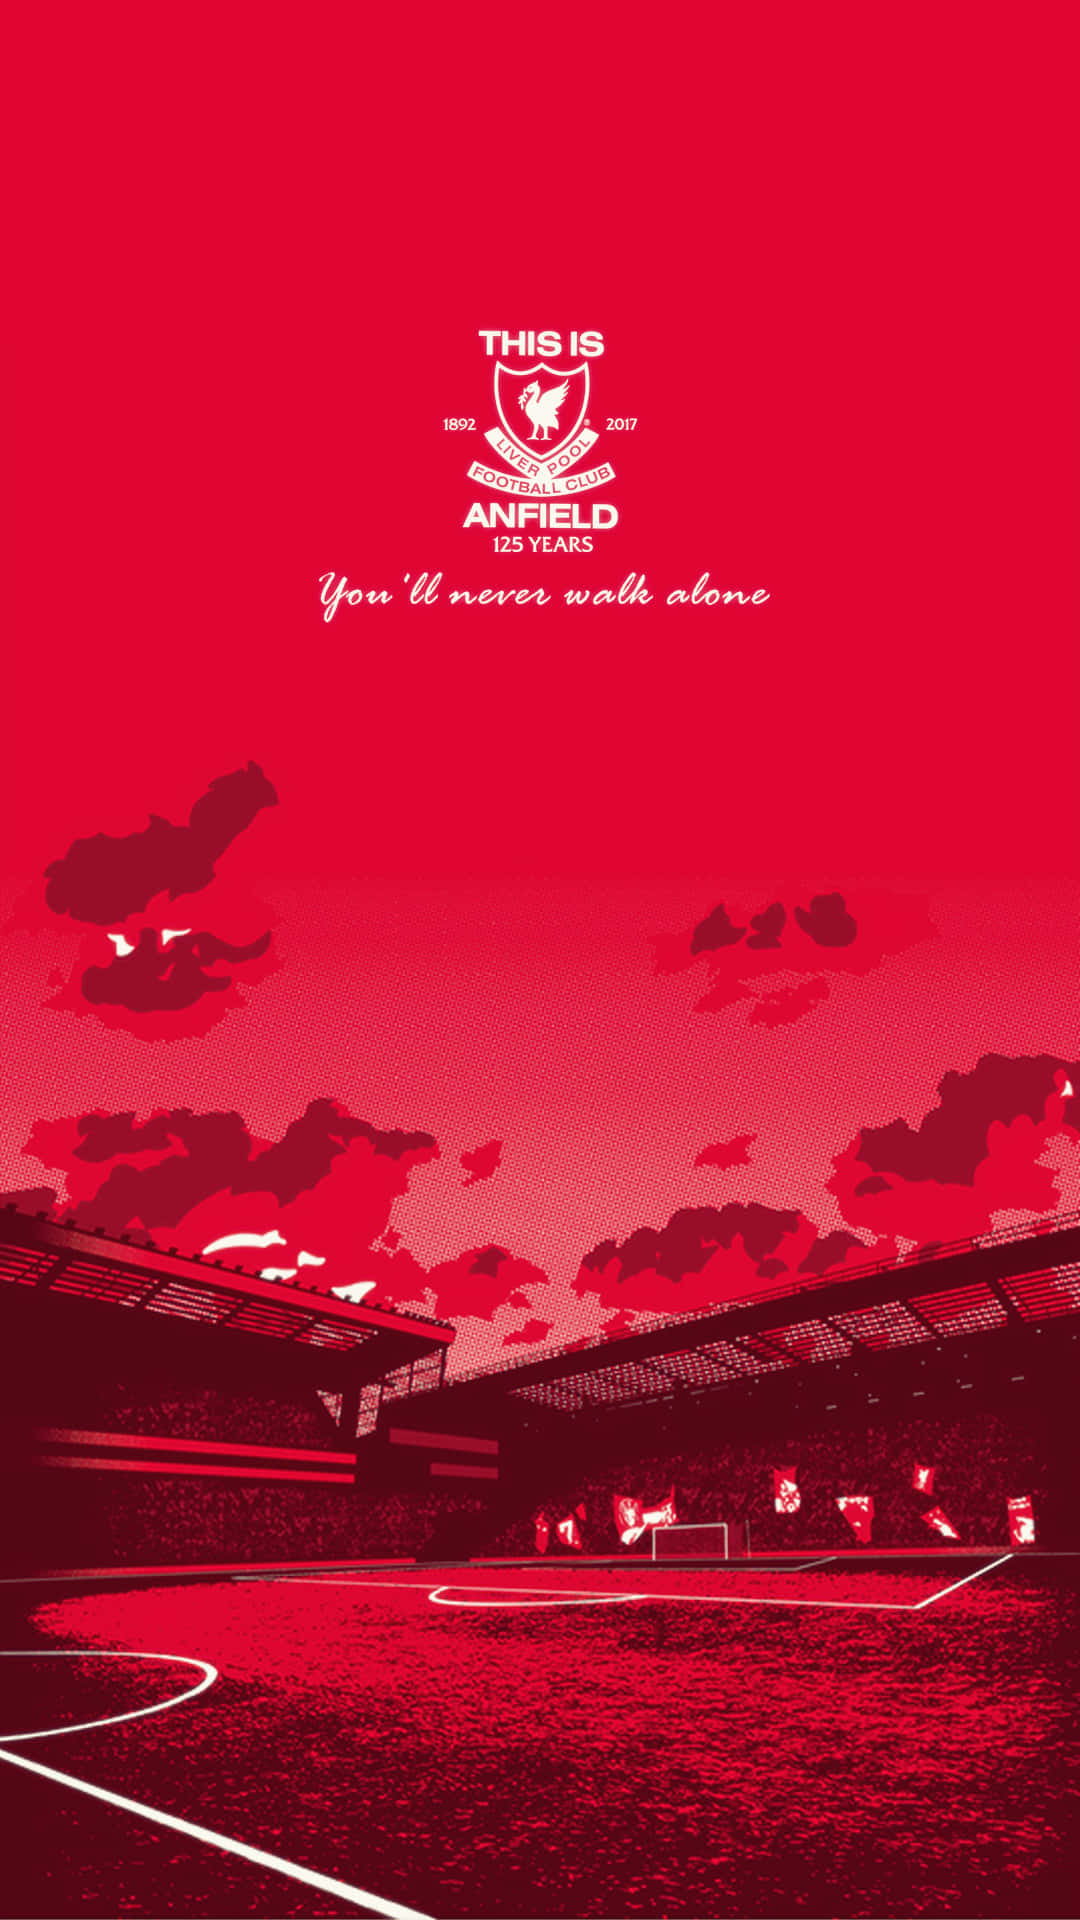 Get Ahead with the Latest Liverpool Iphone Wallpaper